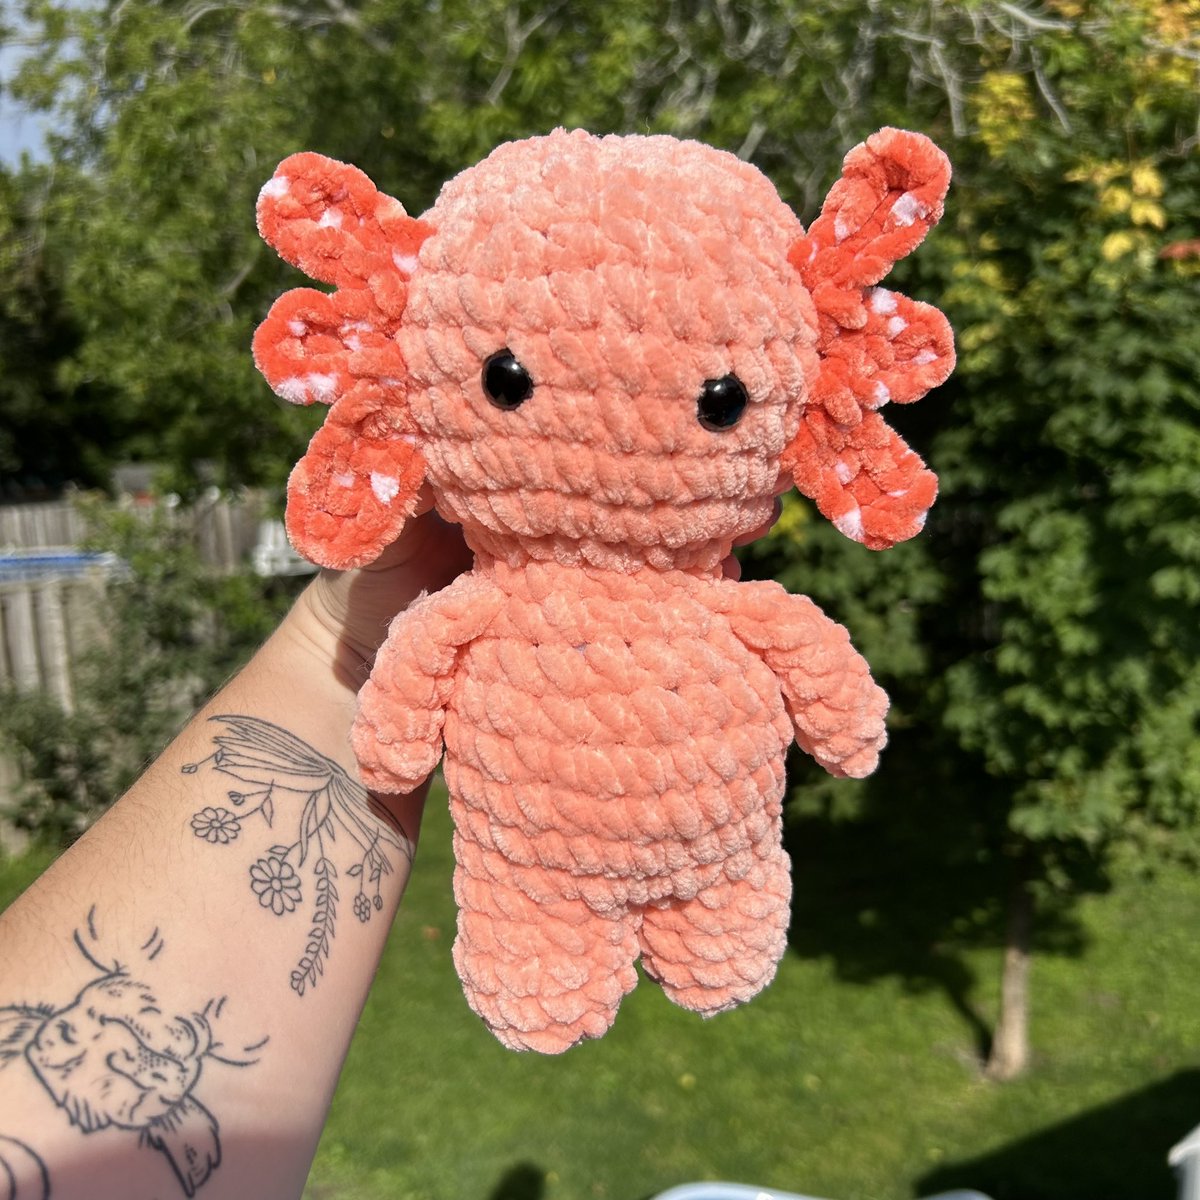 crazy for axolotls!!

get 50% off with code ‘GOWILD’